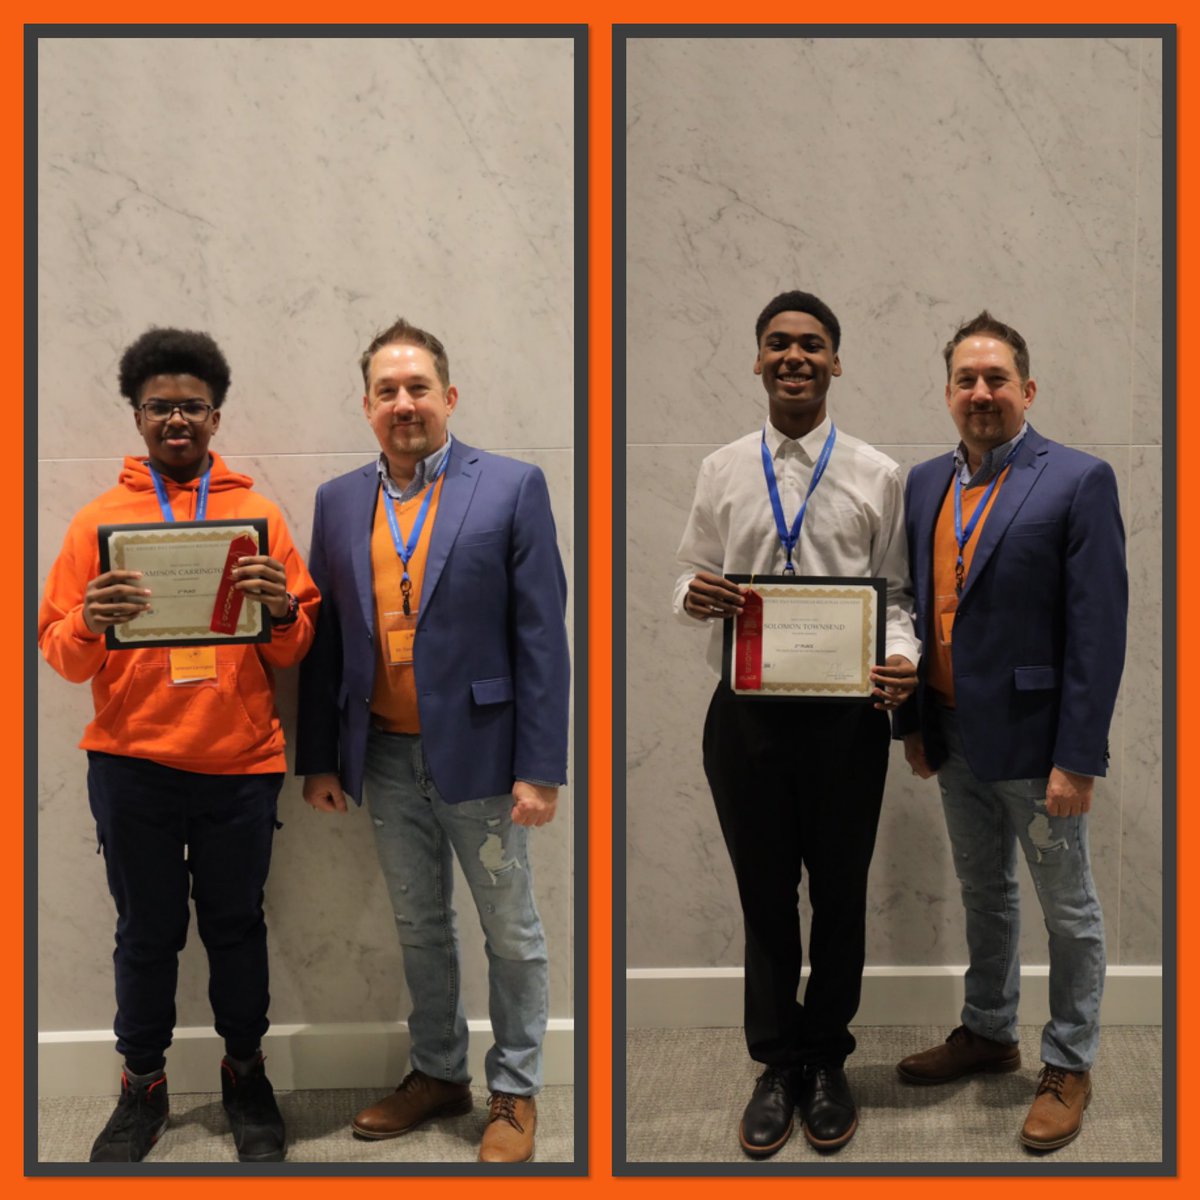 Students in Mr. Pearce’s World History Honors class represented @ReidRossCougars & won the most awards in the National History Day Competition at UNC-Pembroke. Winners will compete at the upcoming state competition! @CumberlandCoSch @CCSSuptConnelly @LaShandaCarver1 @DrTMJohnson